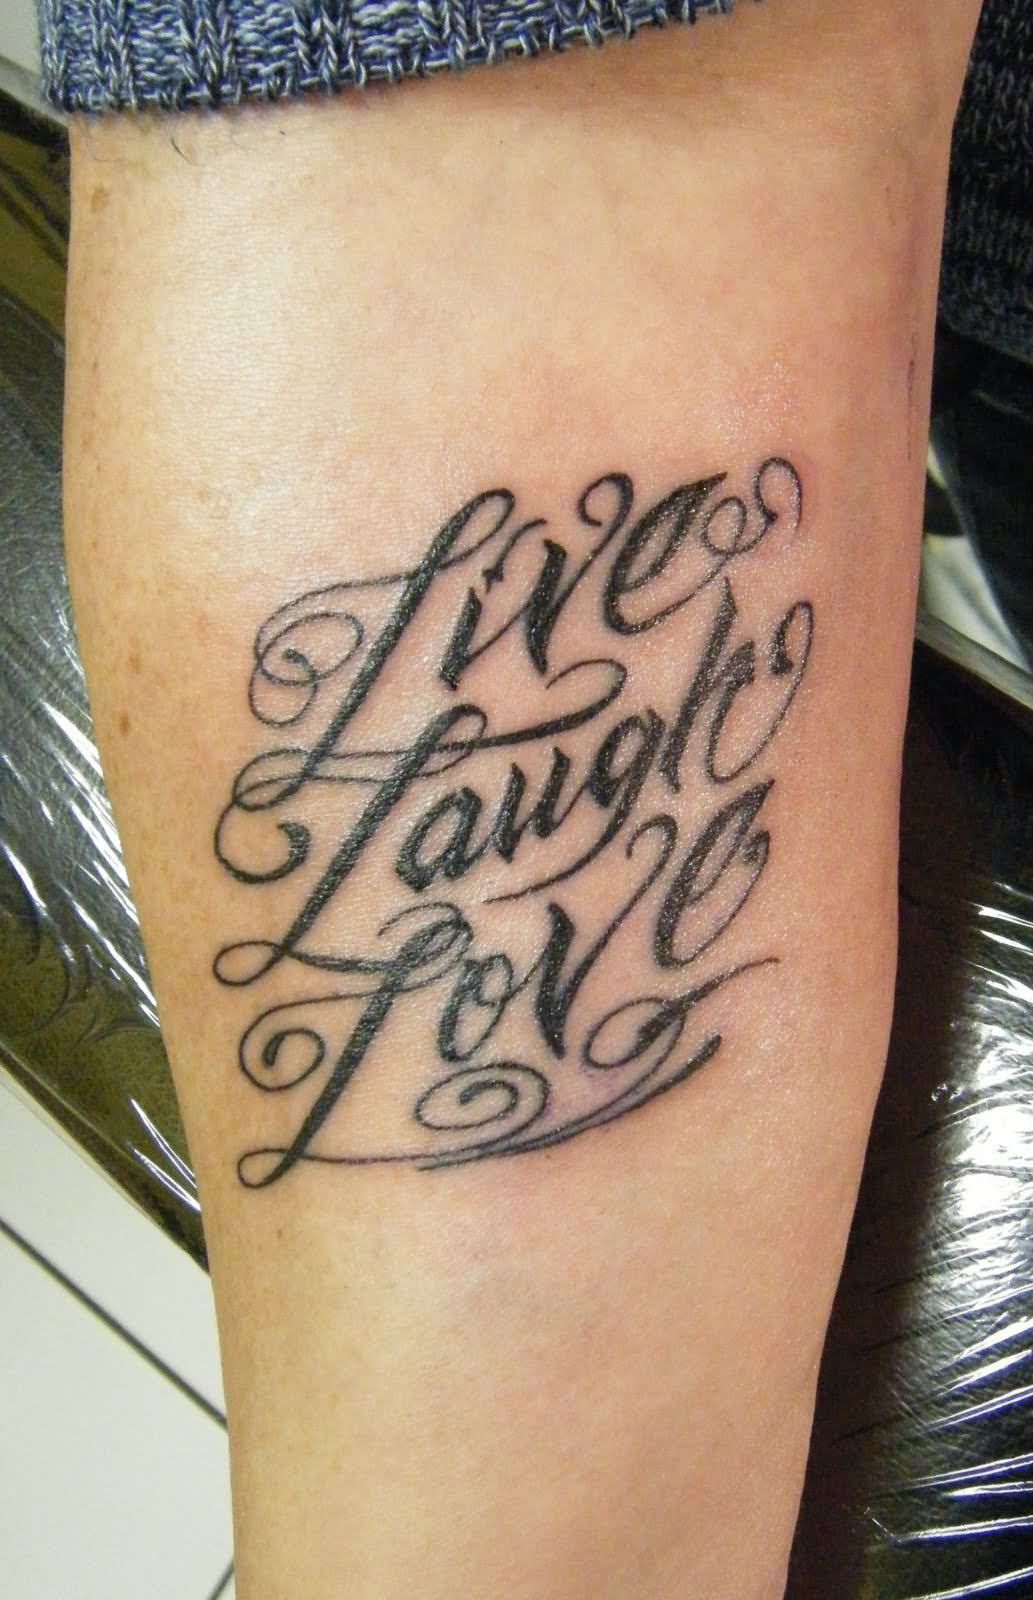 Live Laugh Love Tattoo Design Idea For Girls throughout dimensions 1033 X 1600